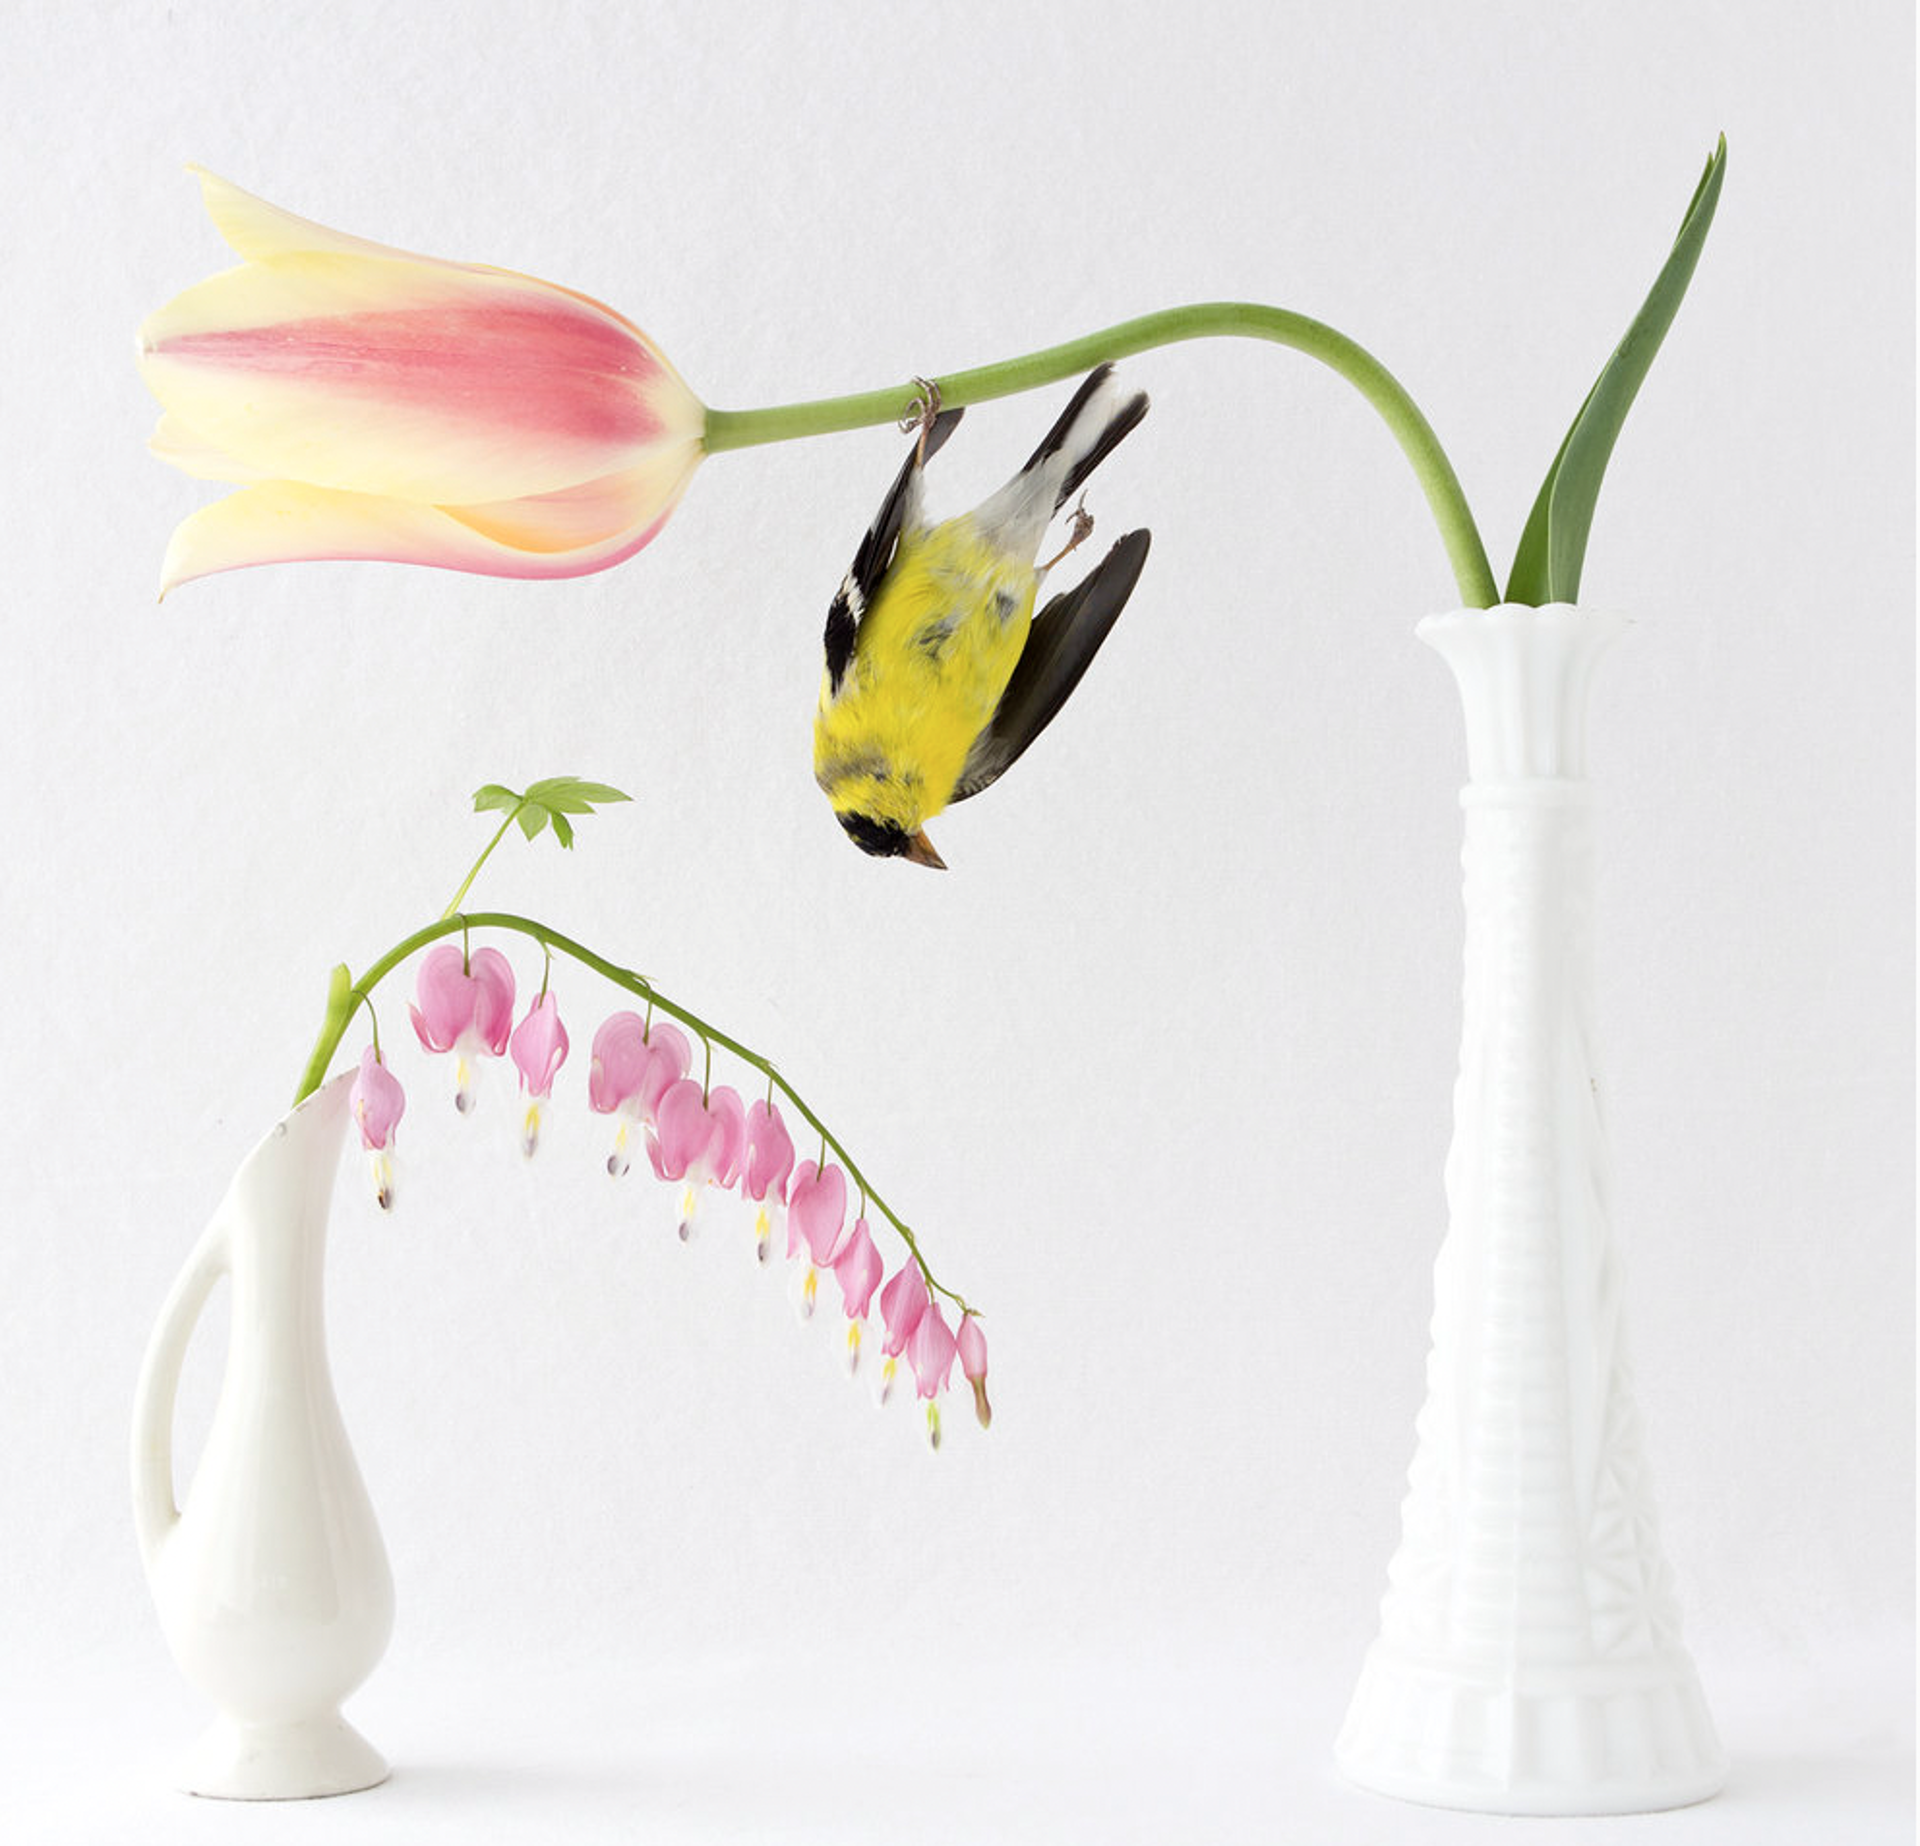 Still Life with Goldfinch, Bleeding Heart, andTulip by Kimberly Witham